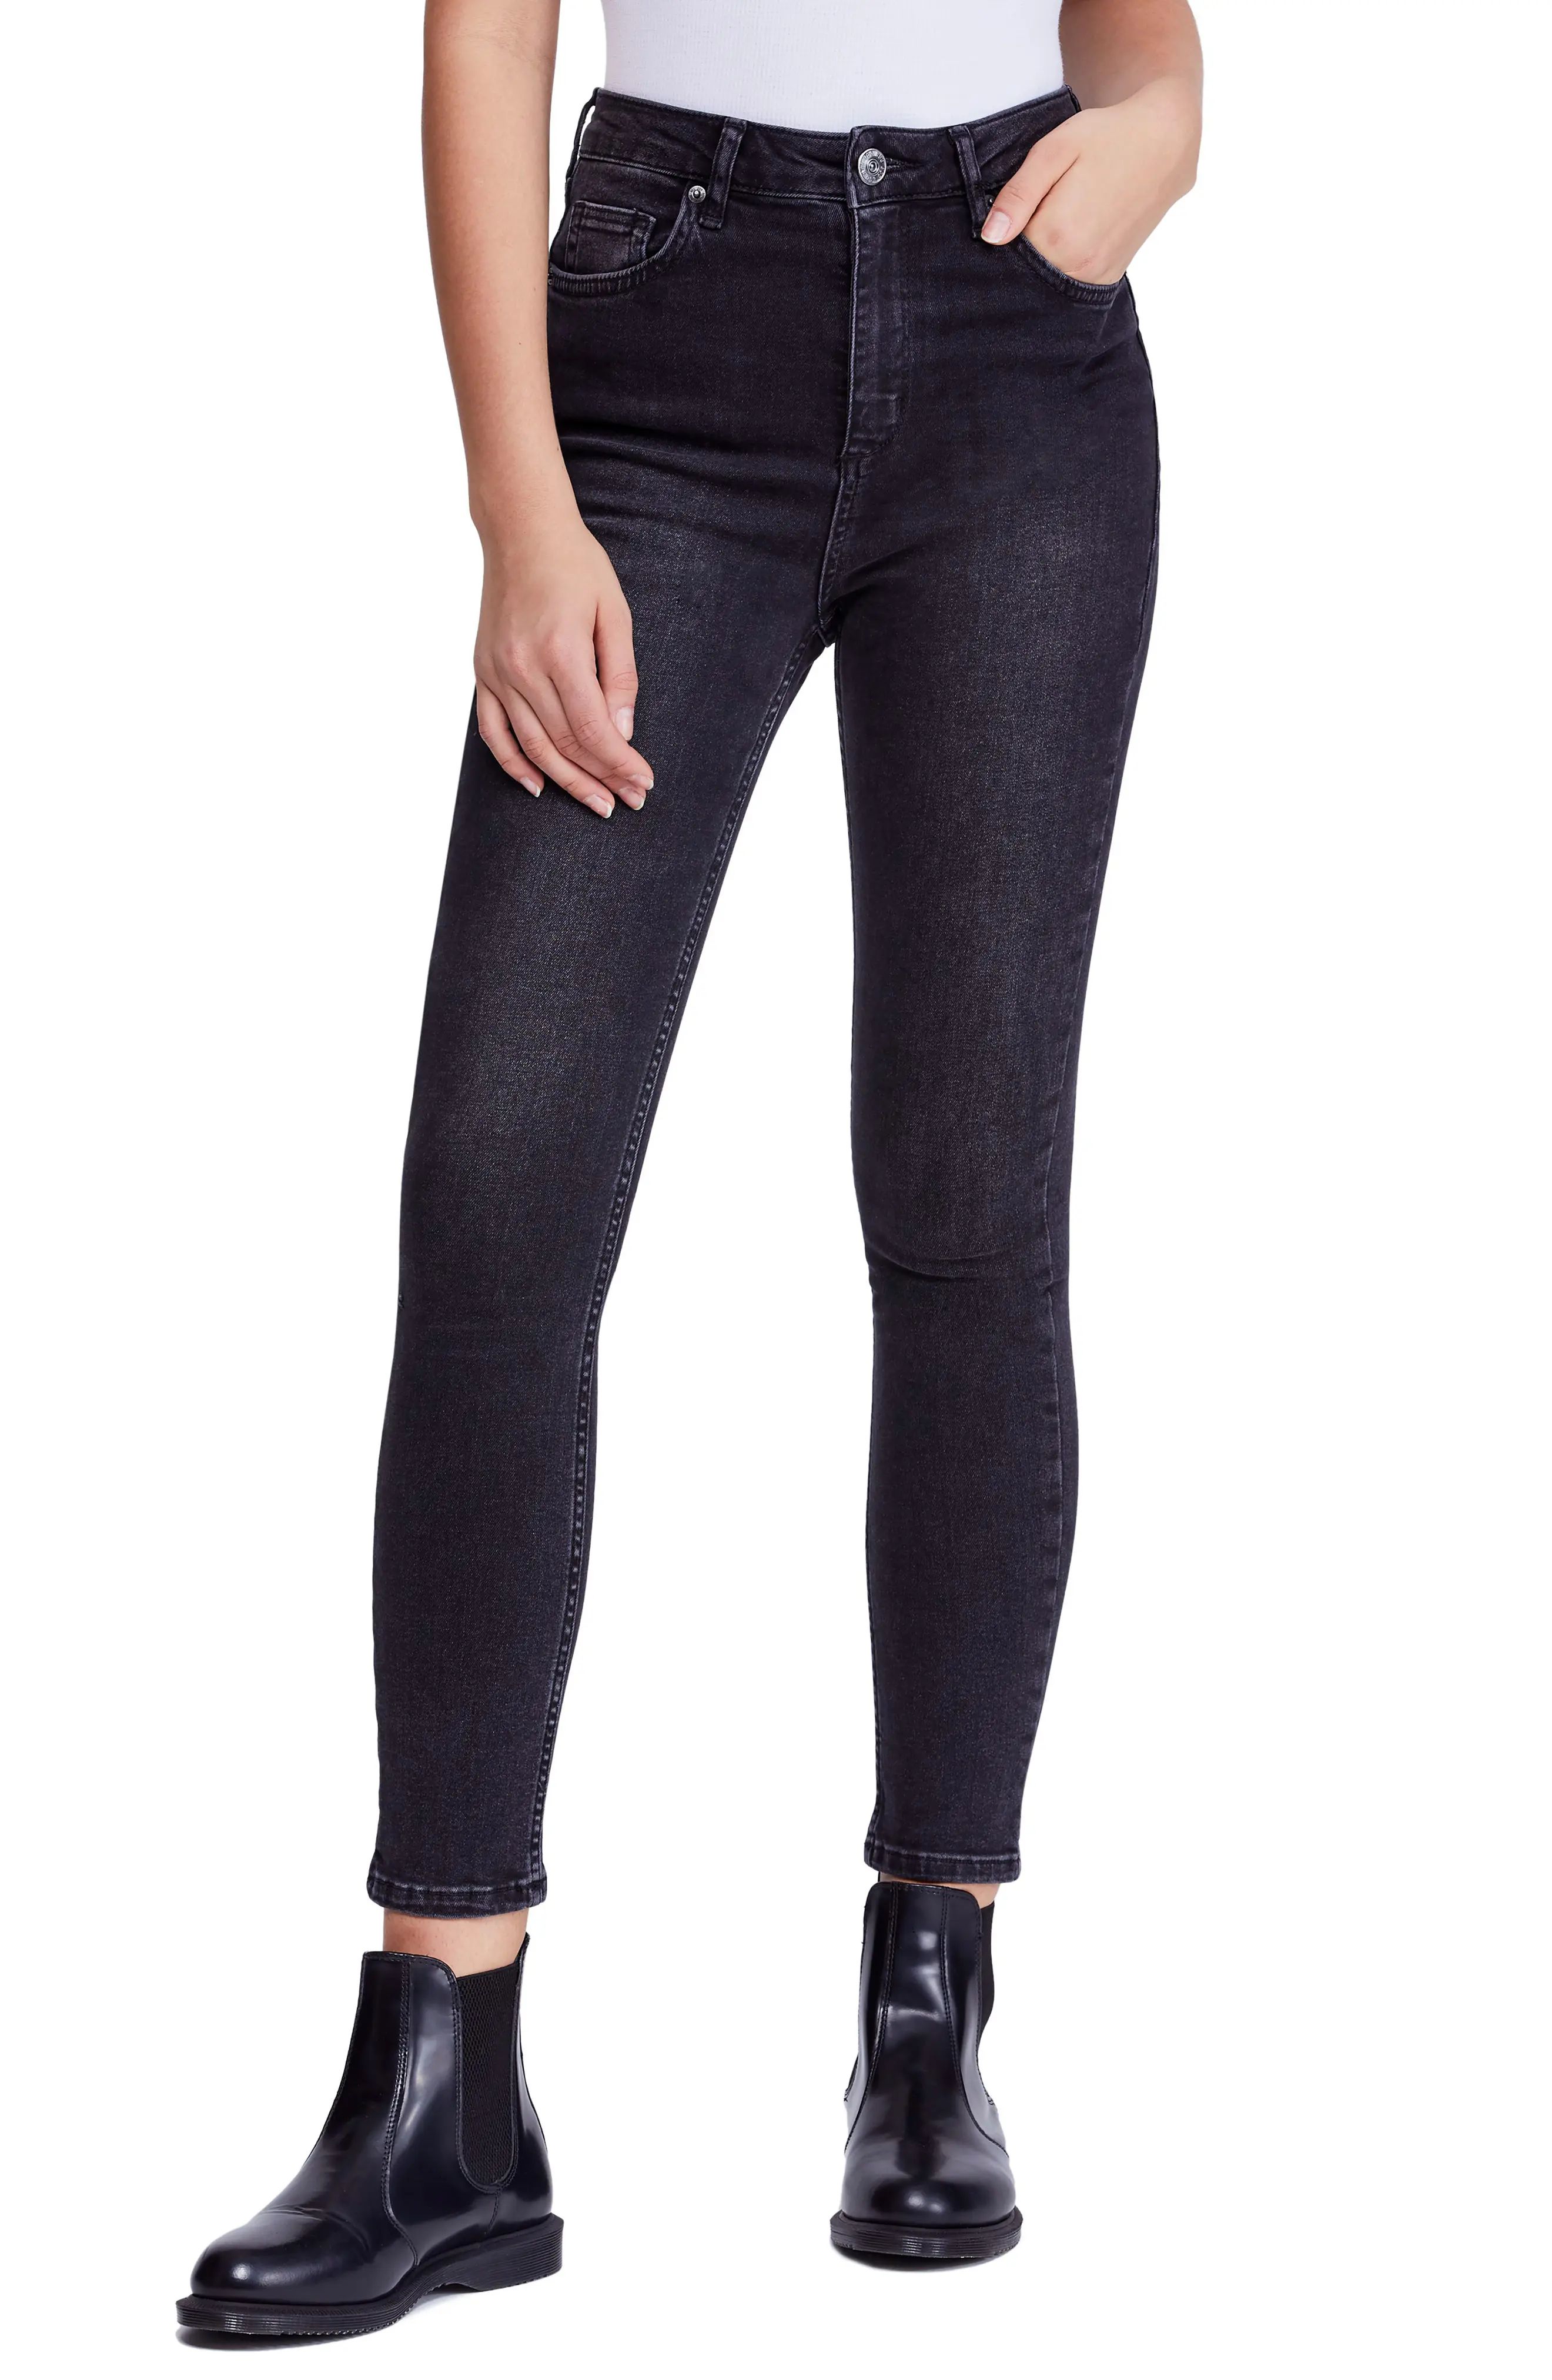 Women's Bdg Urban Outfitters Pine High Waist Skinny Jeans, Size 25 - Black | Nordstrom